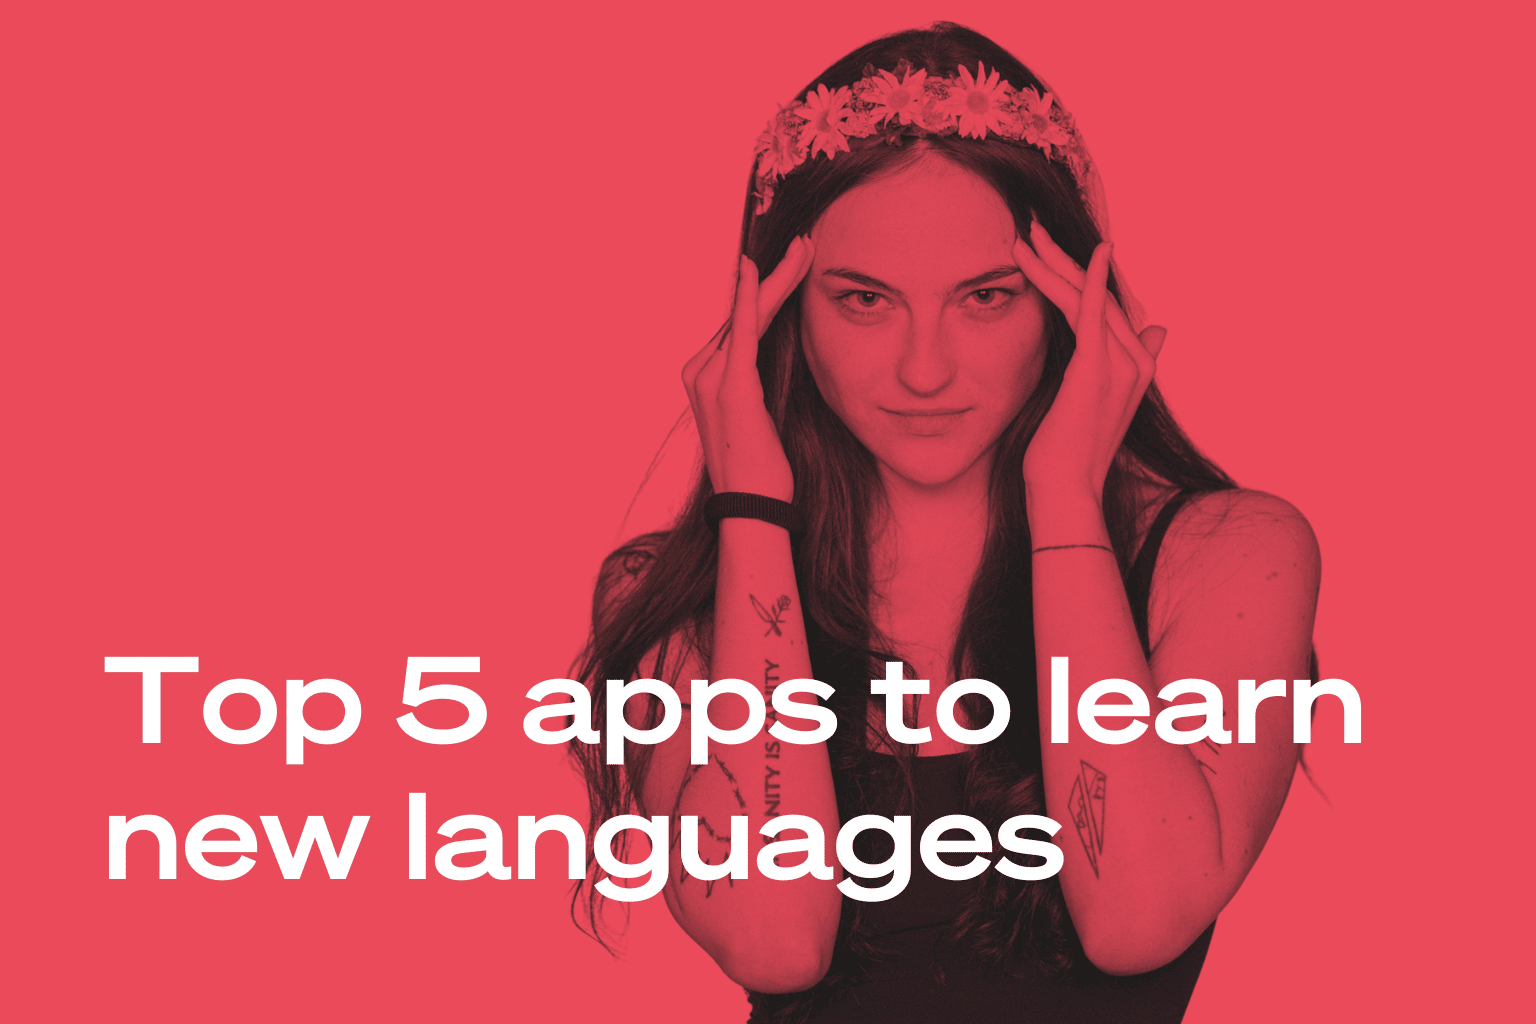 Top 5 apps to learn new languages